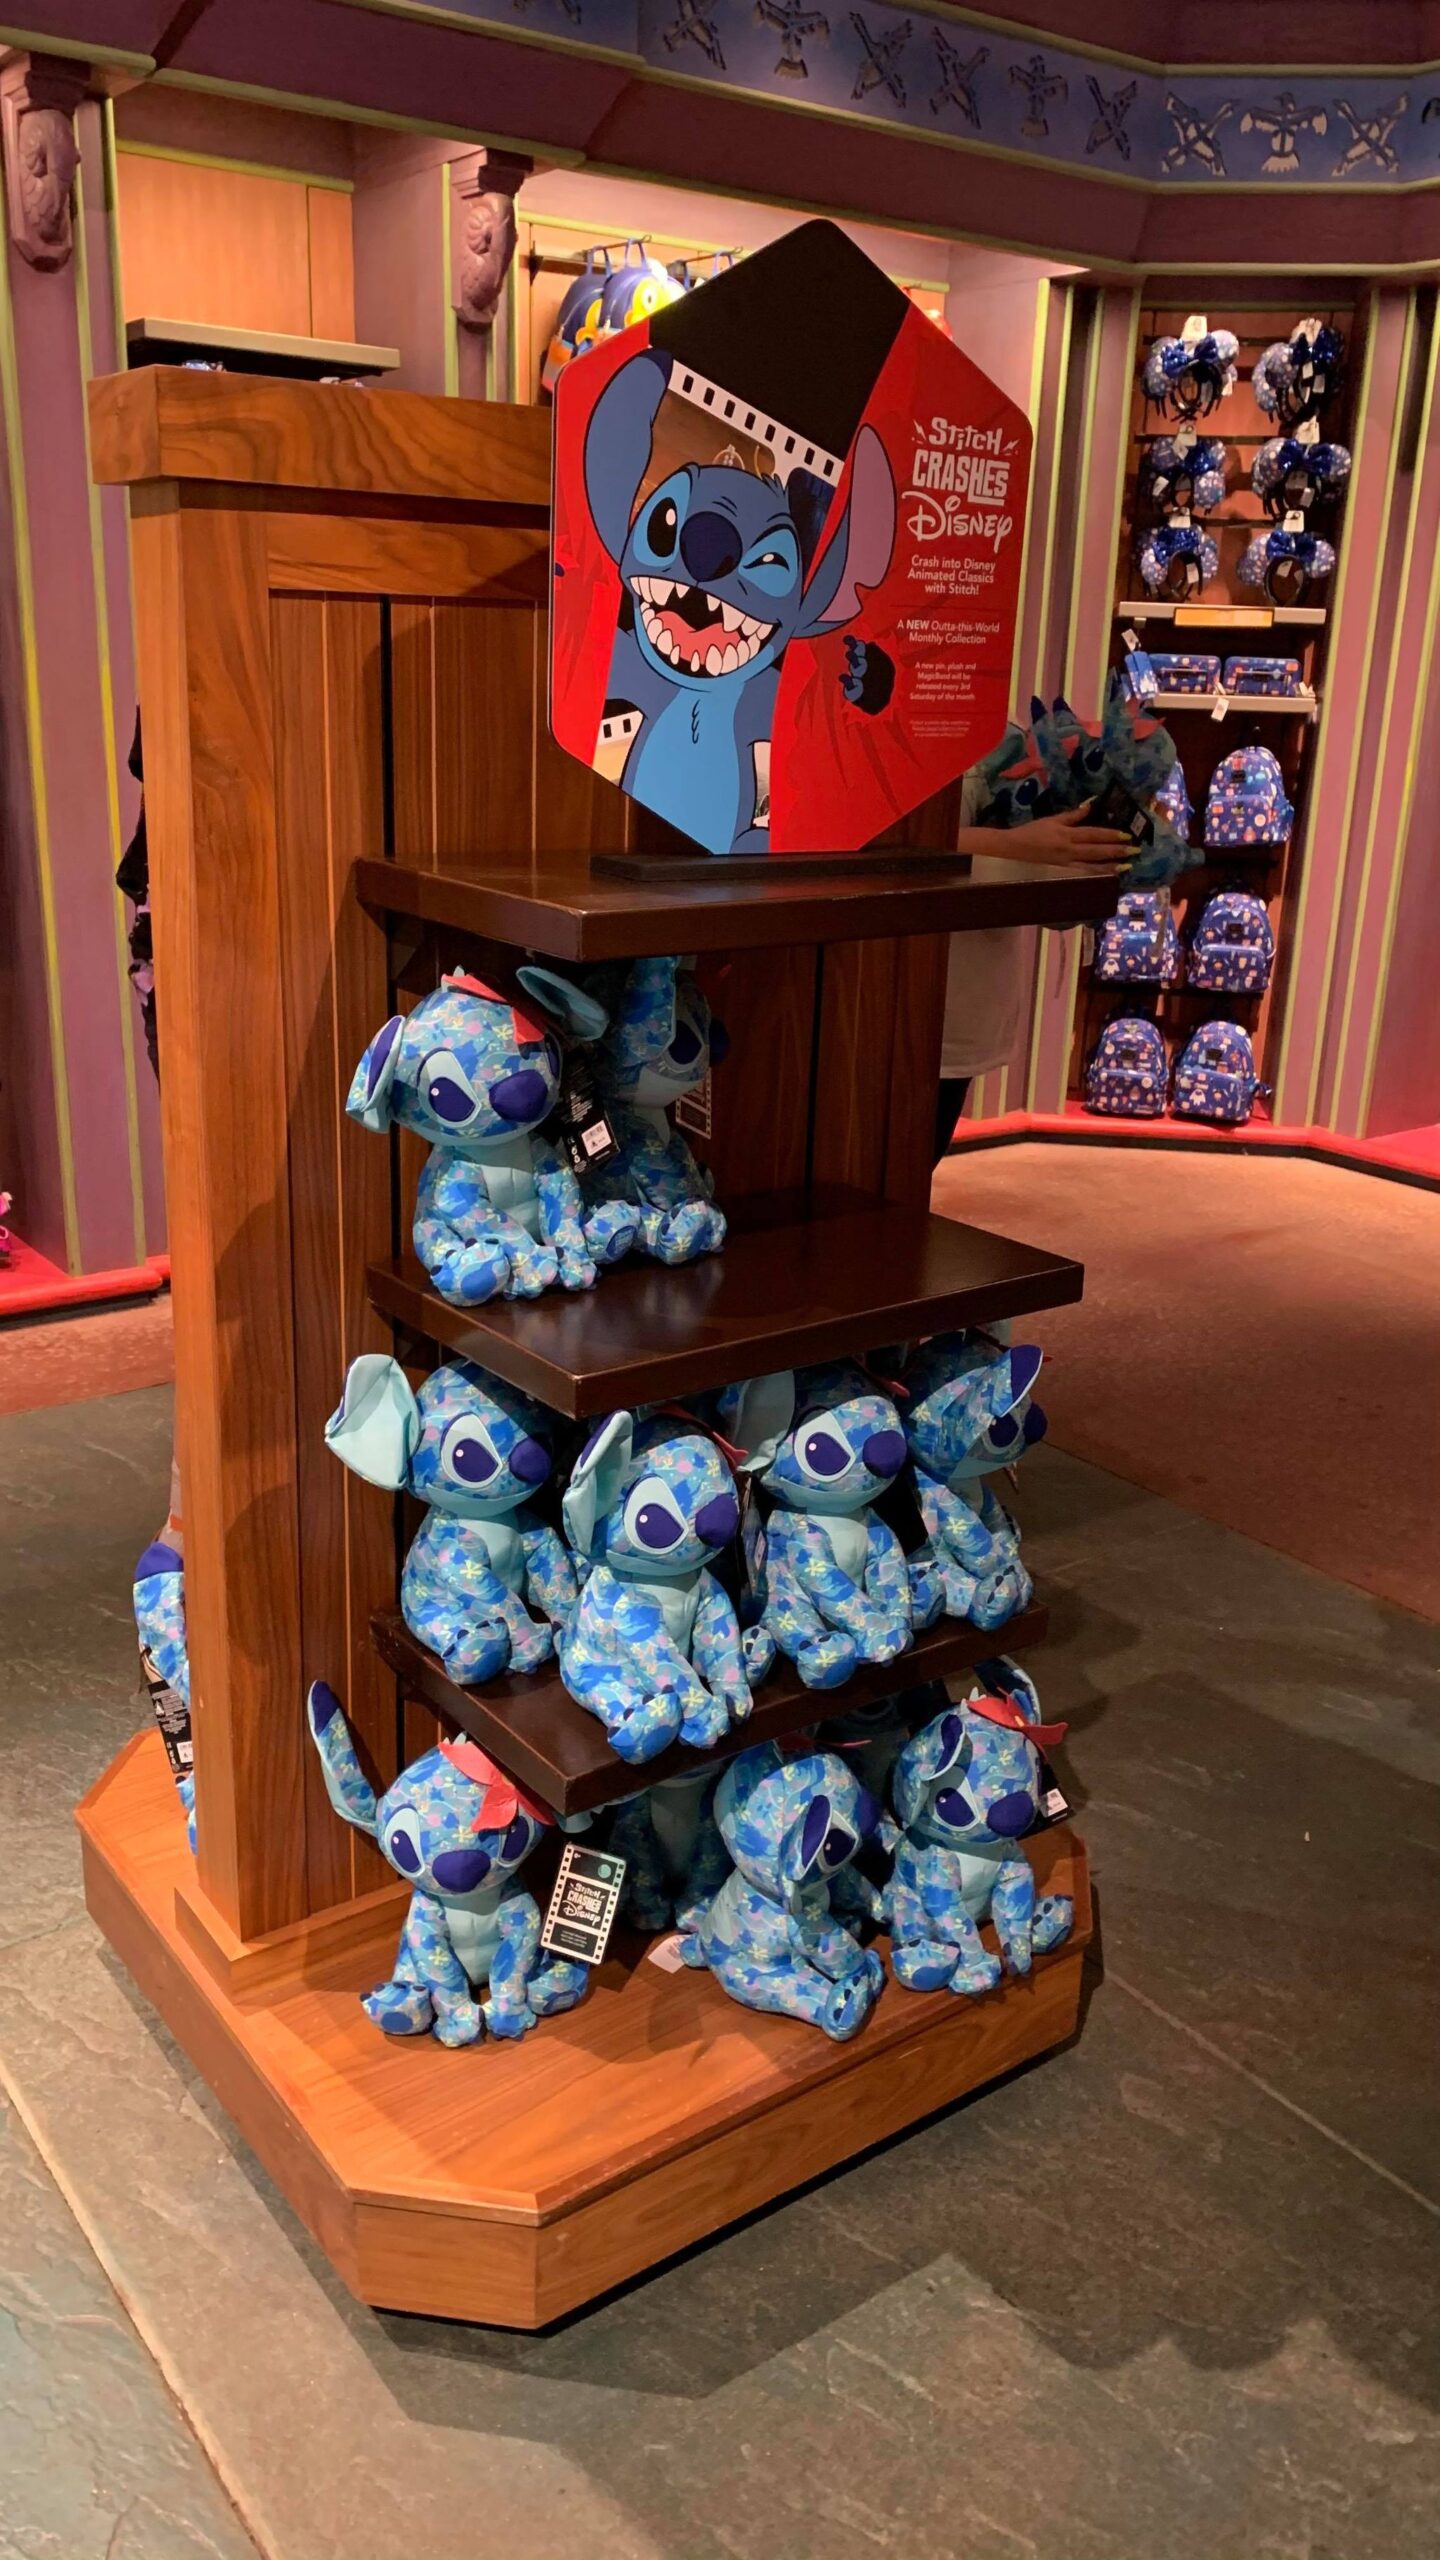 Stitch Crashes The Little Mermaid Collection Arrives At Walt Disney World